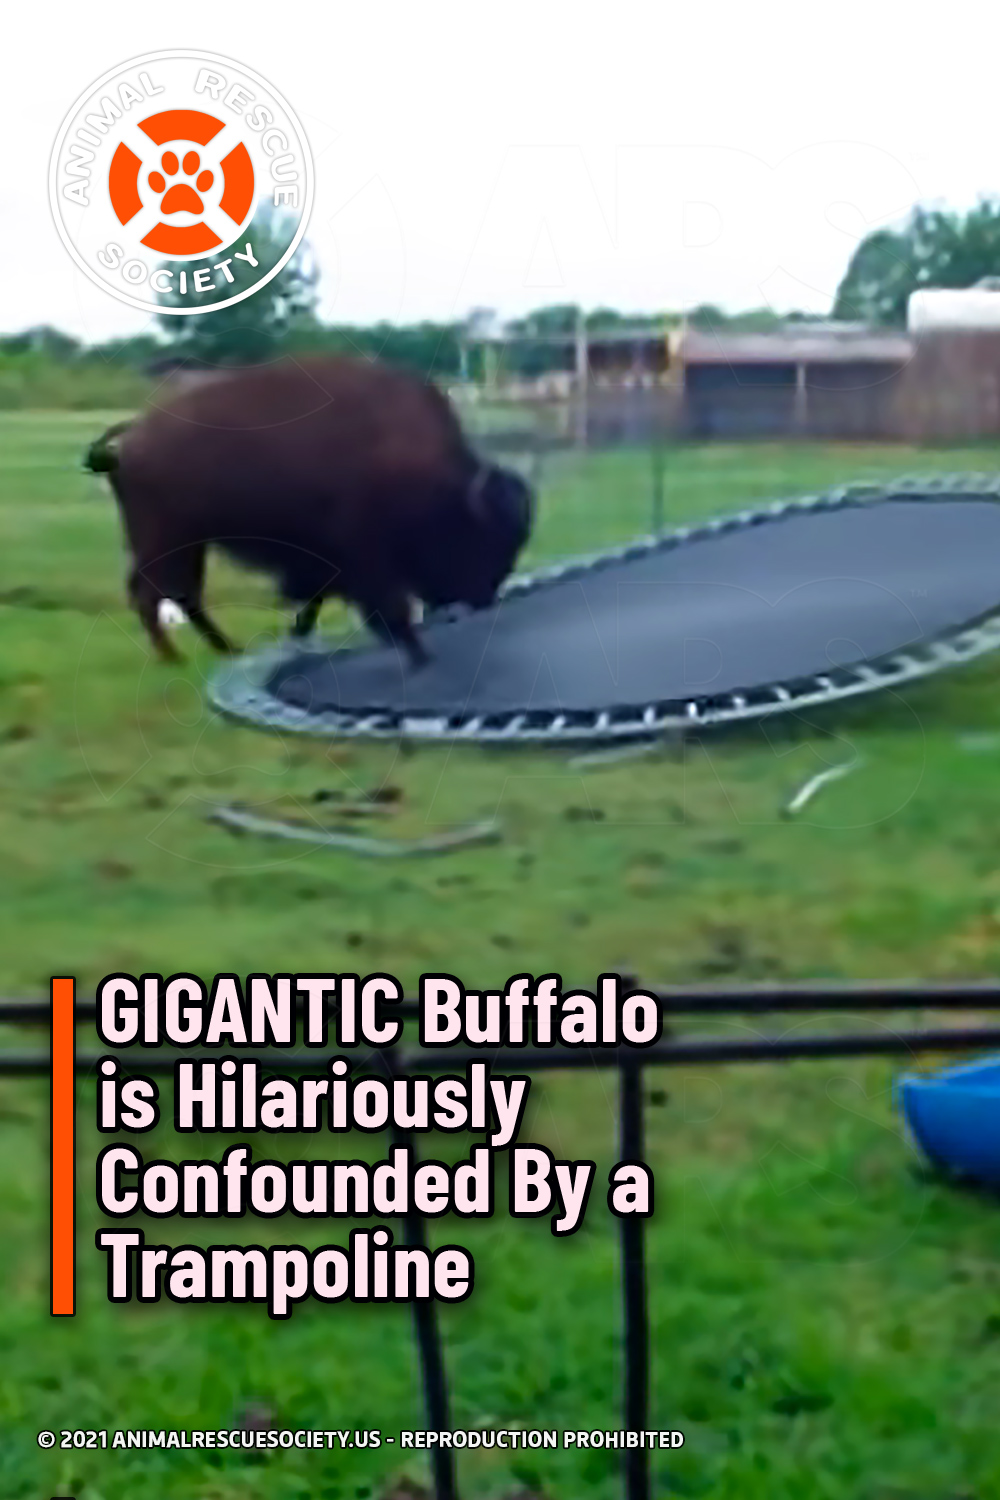 GIGANTIC Buffalo is Hilariously Confounded By a Trampoline